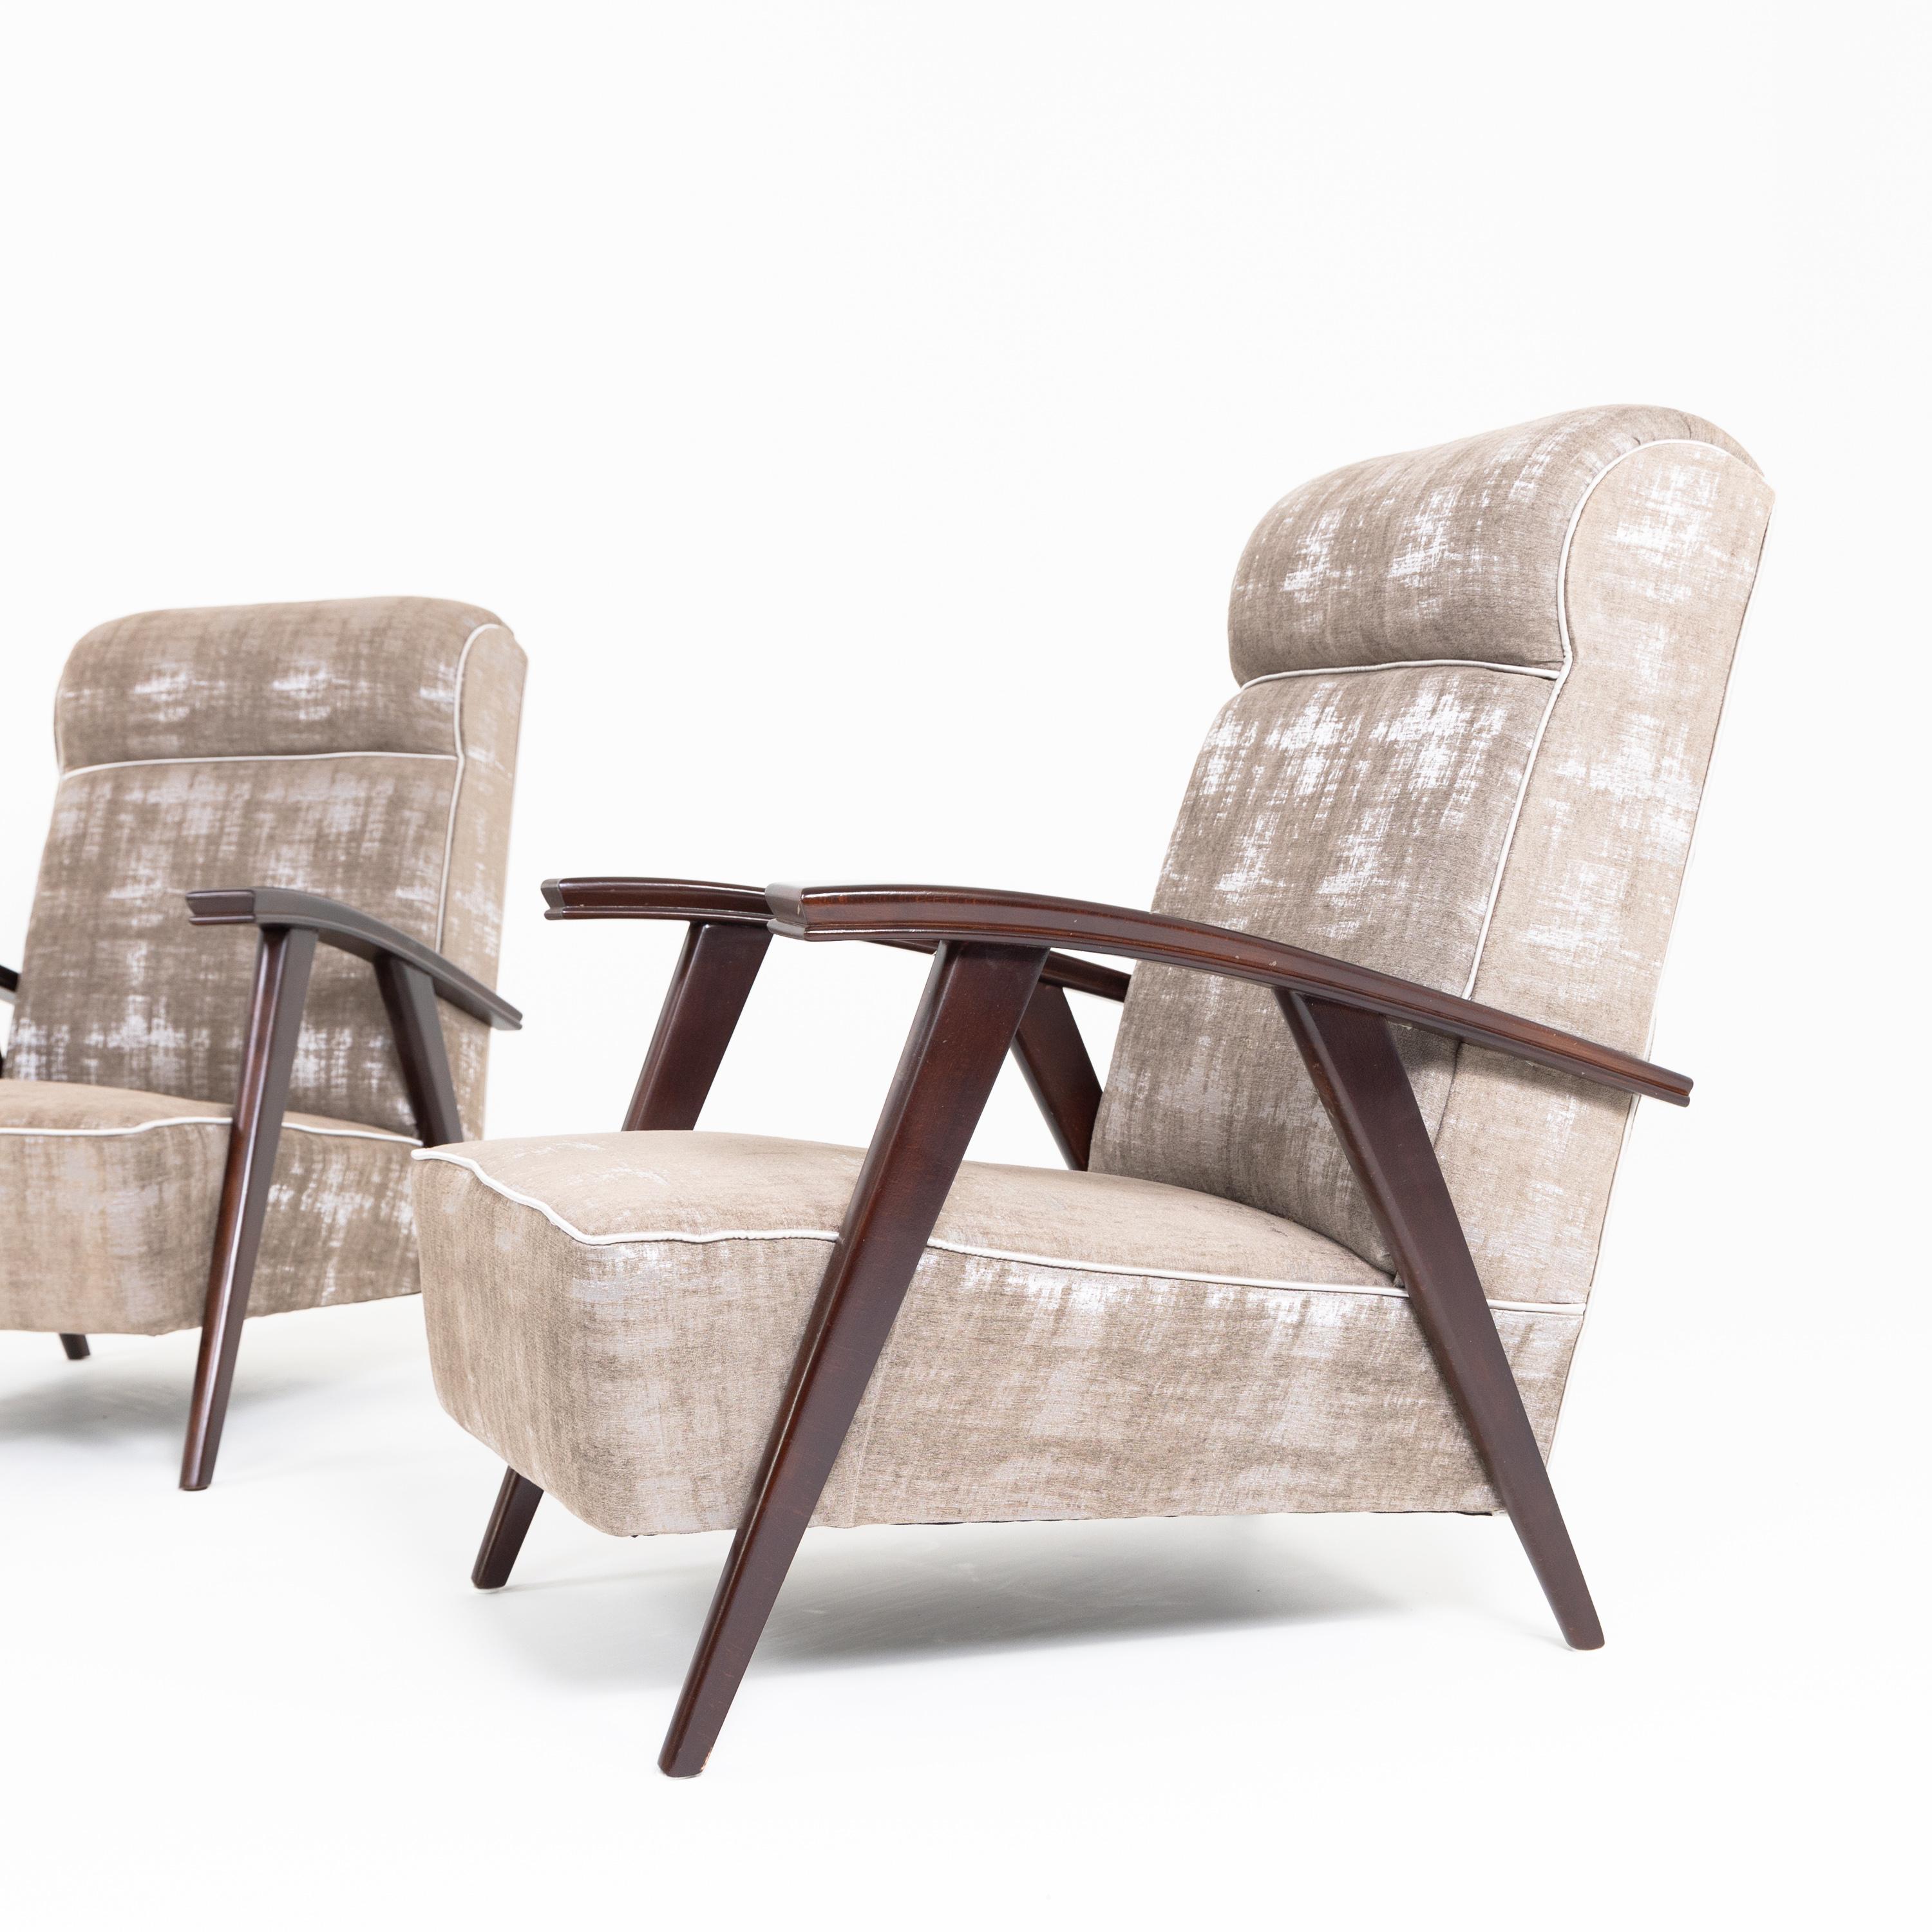 French Pair of Modernist Armchairs Attributed to Jacques Adnet